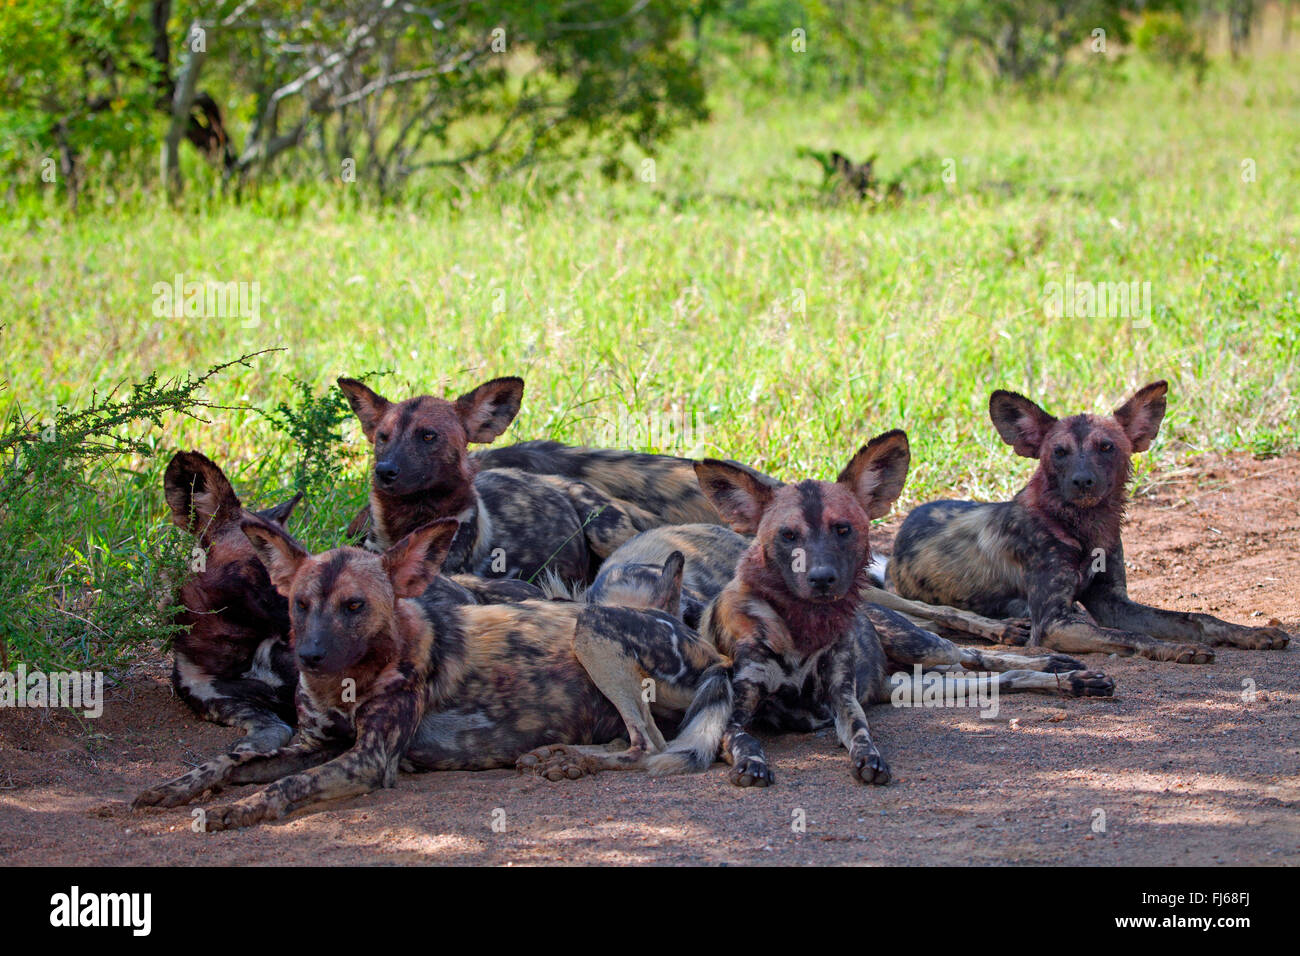 African wild dog, African hunting dog, Cape hunting dog, Painted dog, Painted wolf, Painted hunting dog, Spotted dog, Ornate wolf (Lycaon pictus), pack lying in shadow, South Africa, Krueger National Park Stock Photo